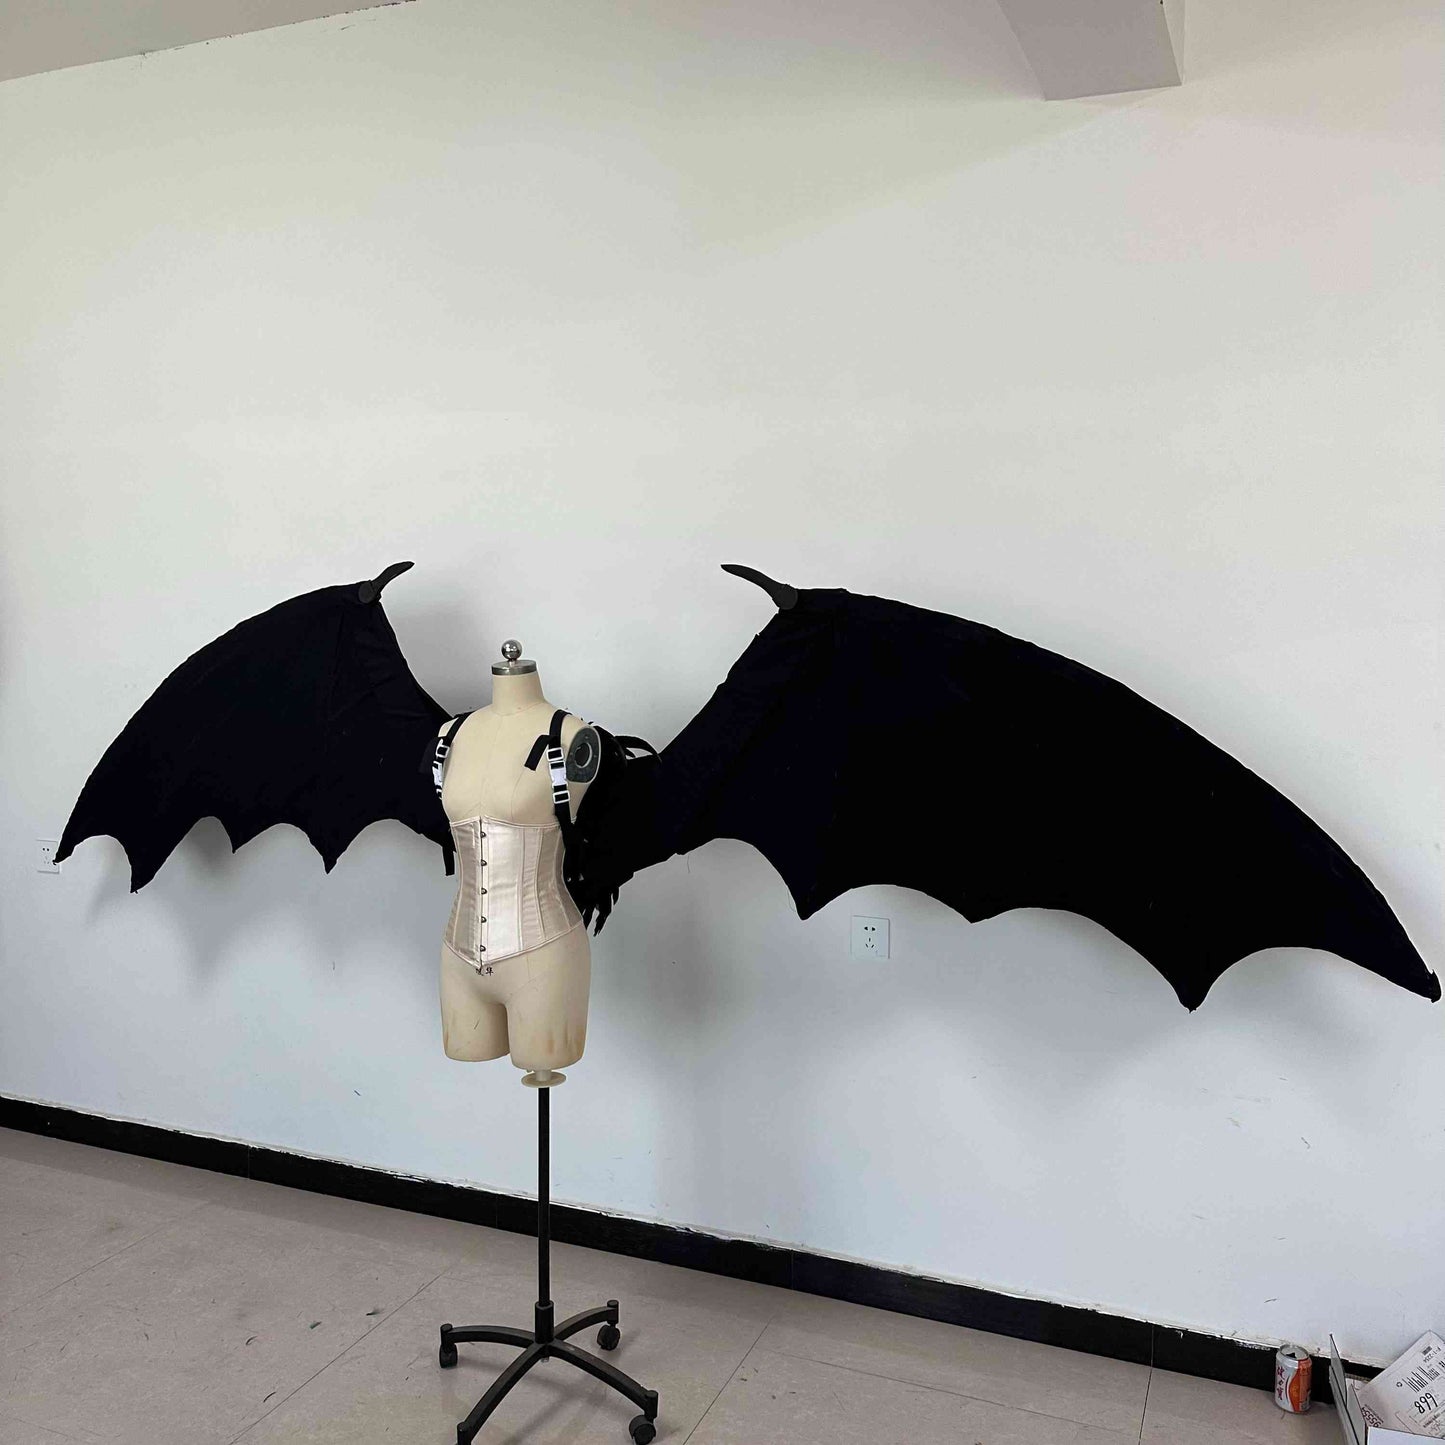 Our large black color devil wings from the left side. Wings are moveable and can control extension and folding remotely. Made from aluminum alloy and cloth. Wings for fallen angel costume or devil costume. Suitable for fantasy photoshoots or events.